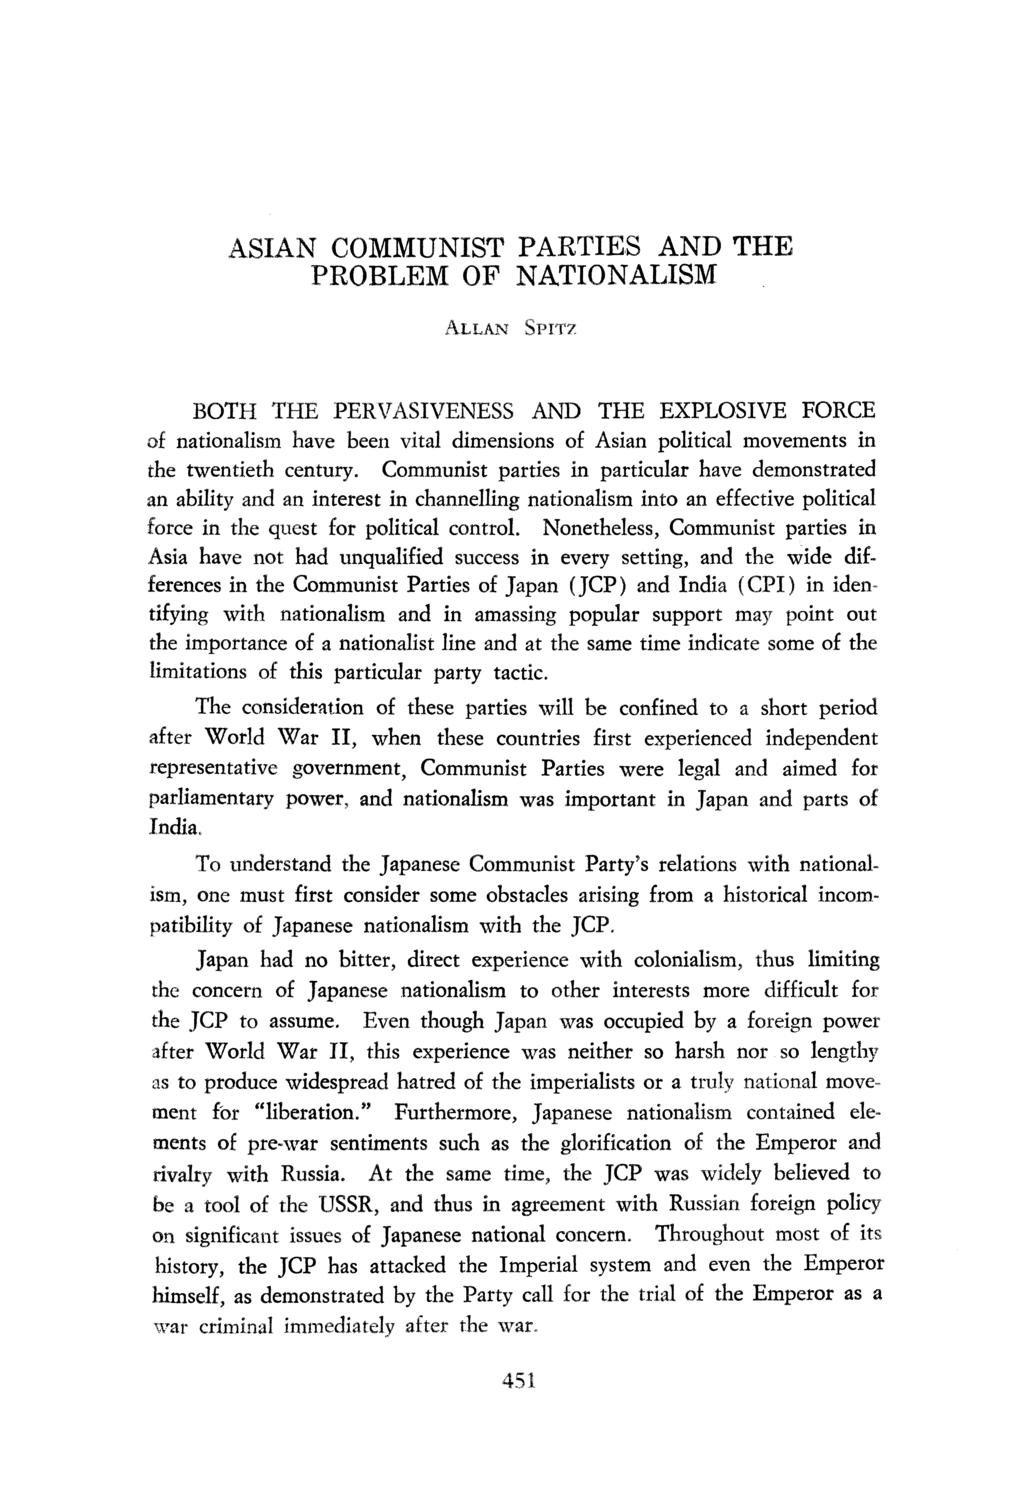 ASIAN COMMUNIST PARTIES AND THE PROBLEM OF NATIONALISM.